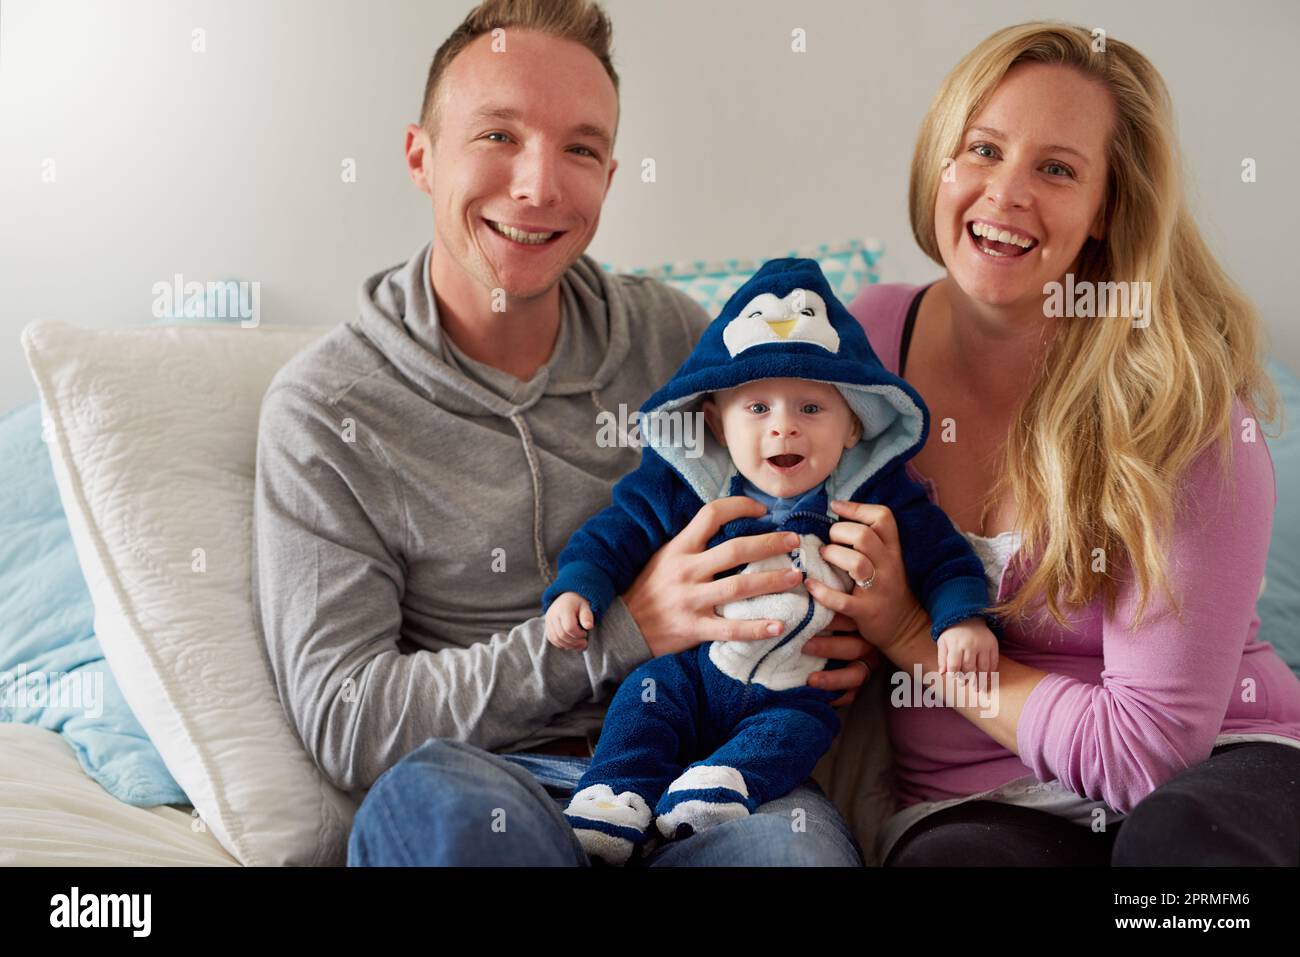 Parenthood has been bliss with this sweet little one. Portrait of a happy family spending quality time together at home. Stock Photo